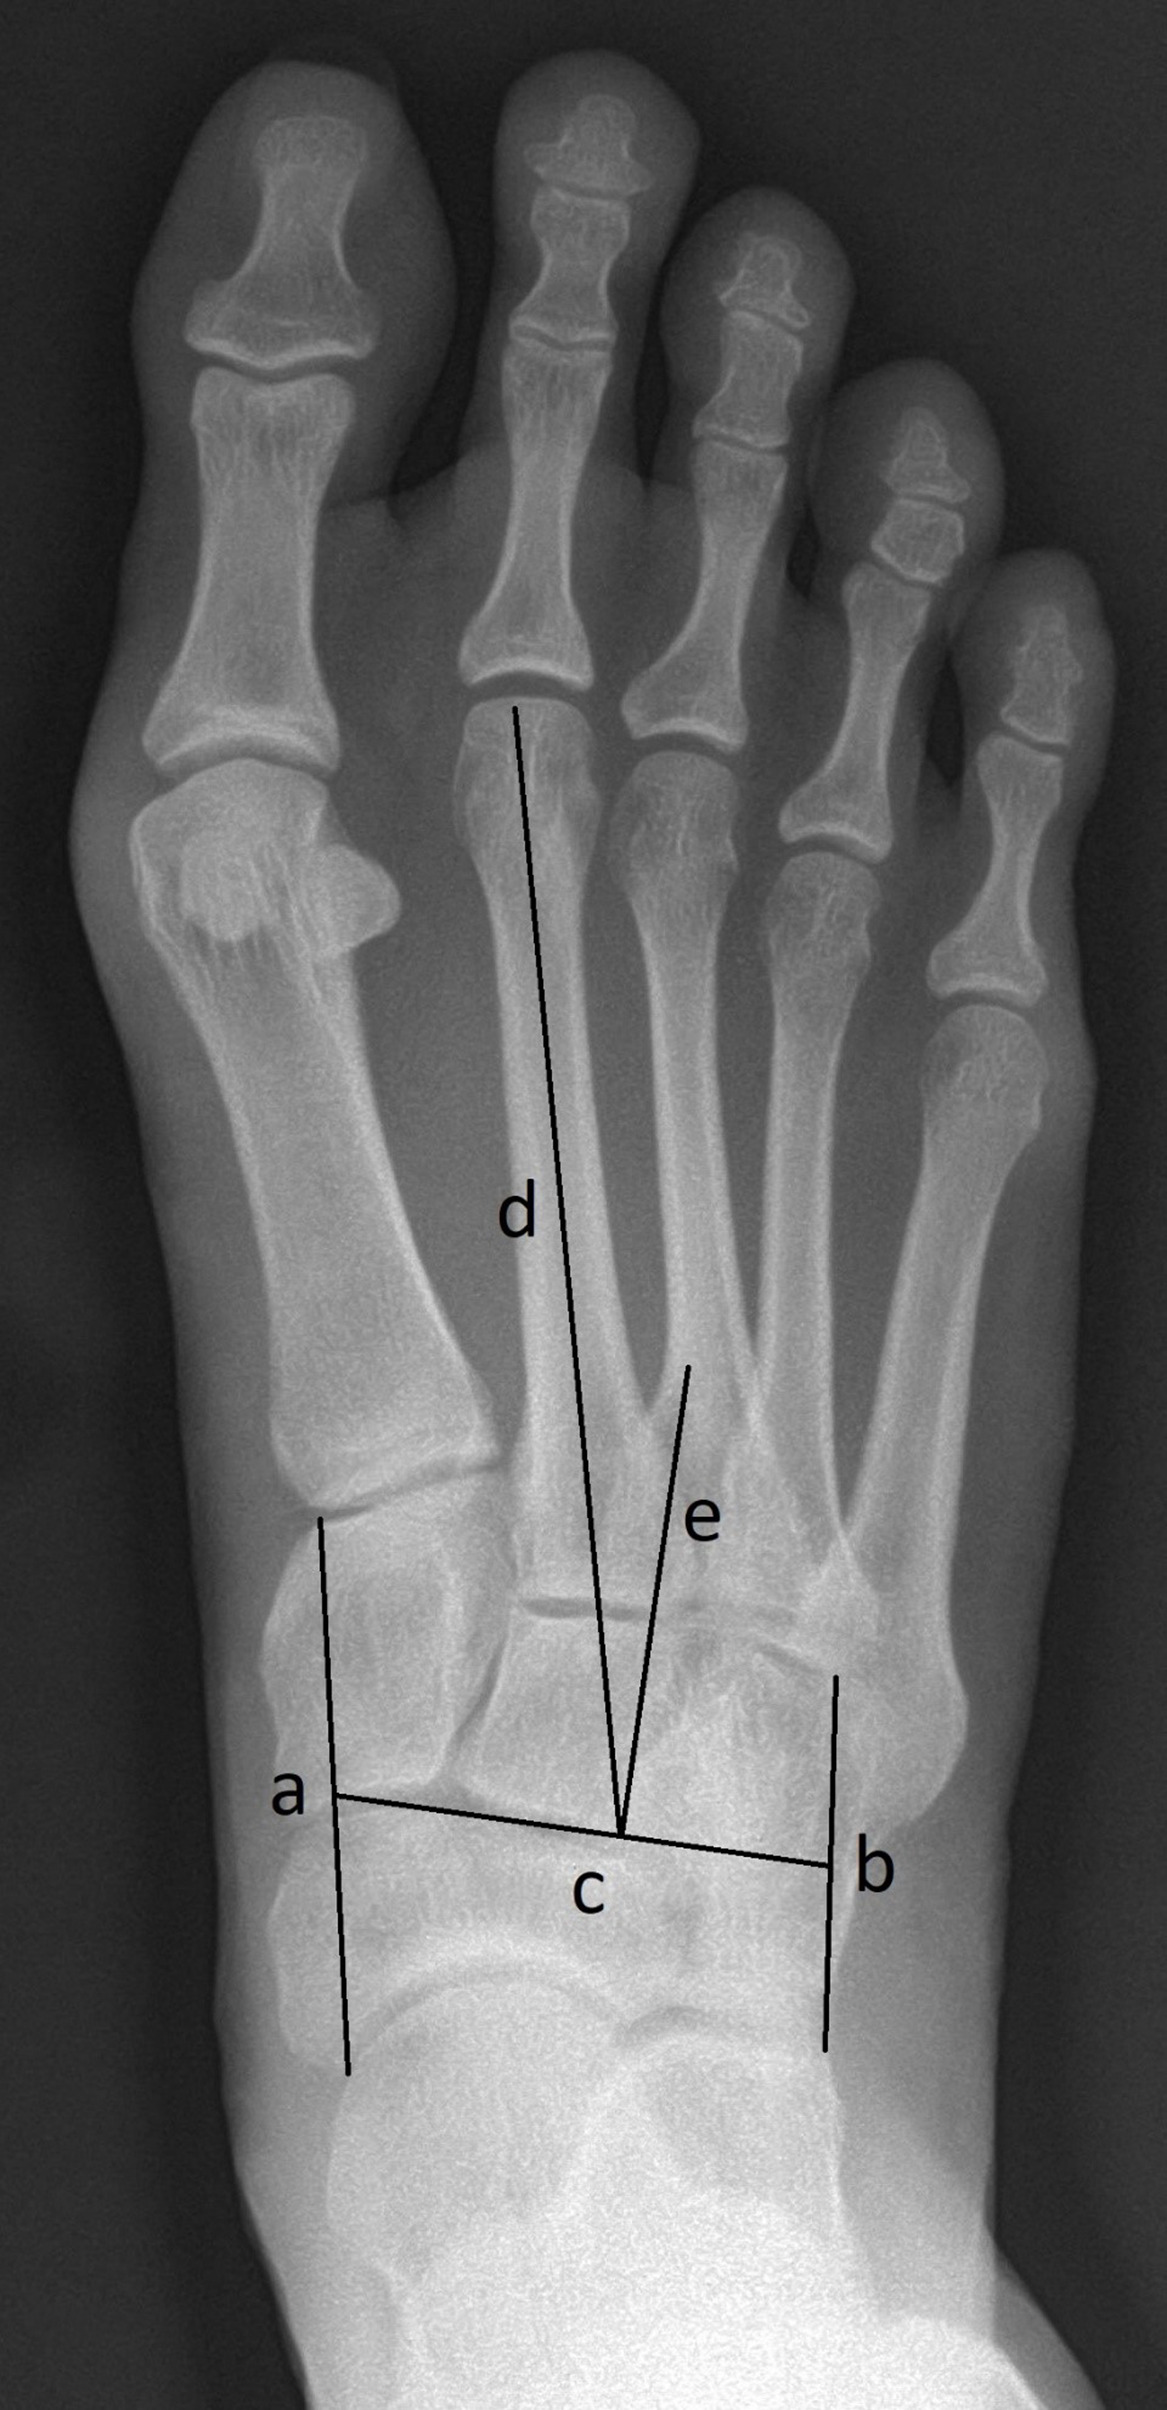 Fig. 1 
          Sgarlato’s metatarsus adductus angle measurement method: Line A extends between the most lateral point of the fourth metatarso-cuboid and the calcaneo-cuboid joints. Line B extends between the most medial point of the talo-navicular and the medial cuneiform-first metatarsal joints. Line C extends between midpoints of lines A and B. Line D represents the longitudinal axis of the second metatarsal bone. Line E is perpendicular to line C and represents the longitudinal axis of the lesser tarsus. Sgarlato's angle is between the lines D and E.
        